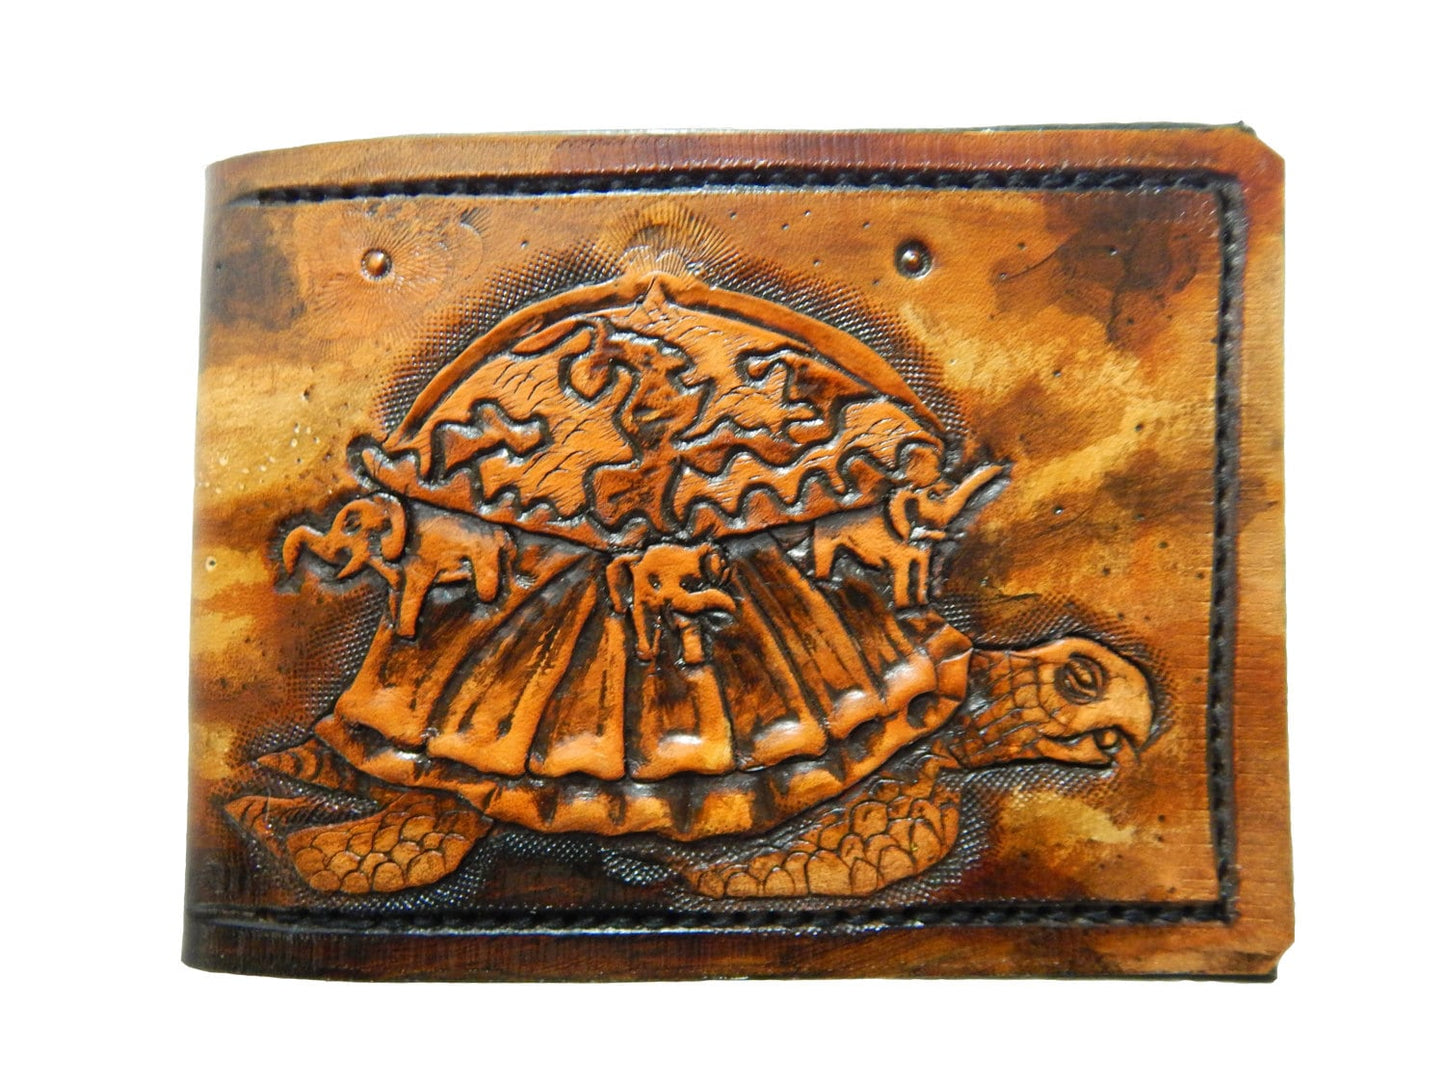 Hindu mythical Cosmic turtle - Akupāra - Leather Bifold Wallet - Handcrafted Wallet -